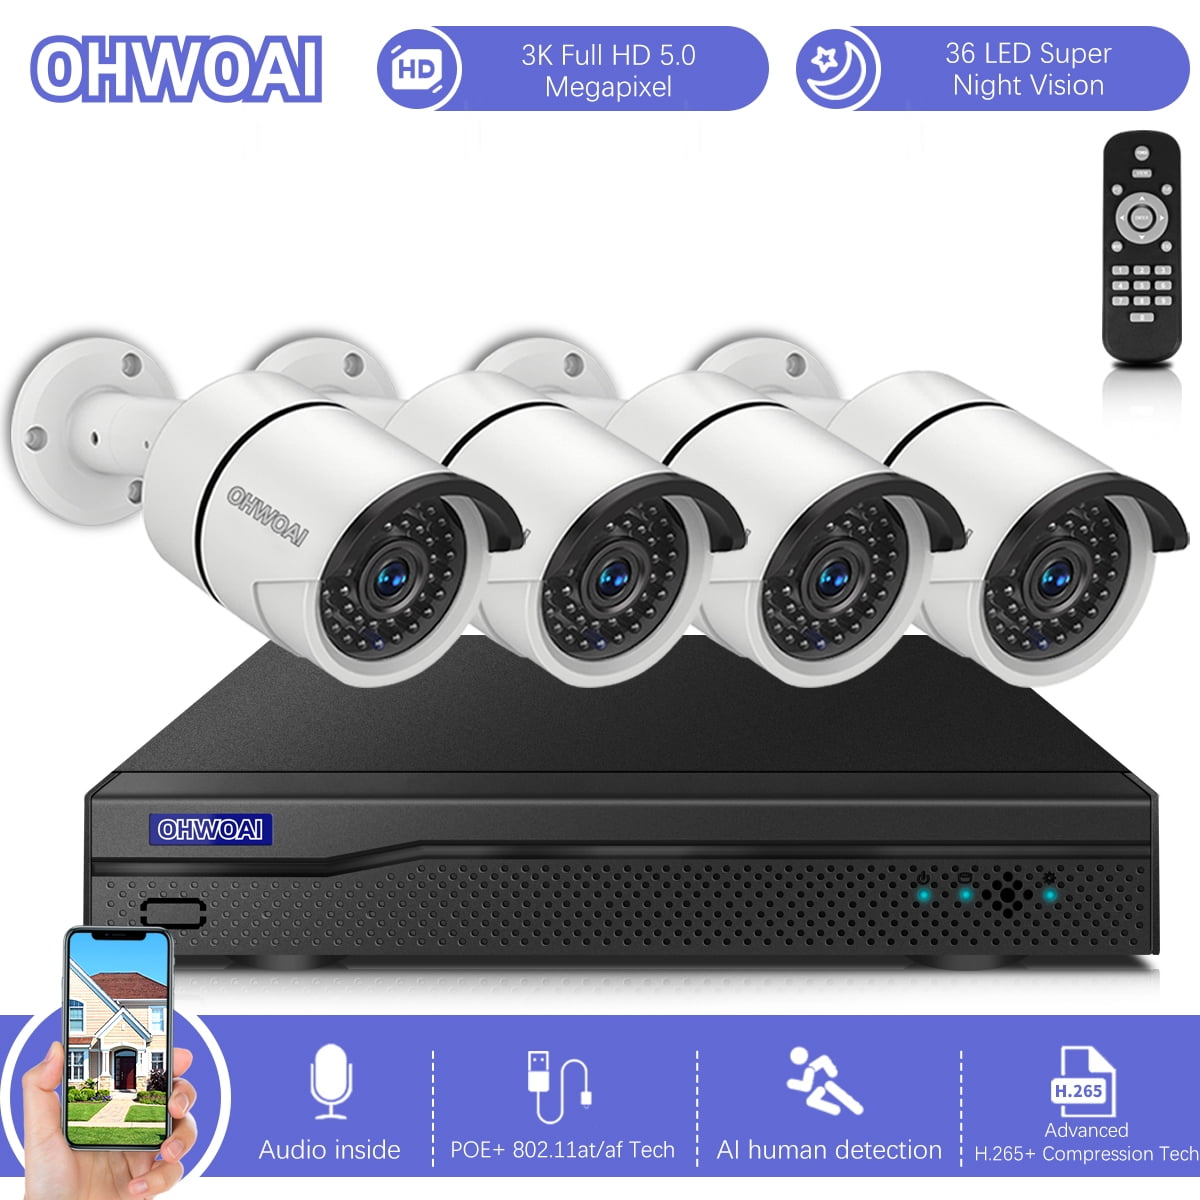 NO HDD OHWOAI 8 Channel 1080P NVR,2MP Network Video Recorder.Work for OHWOAI. 